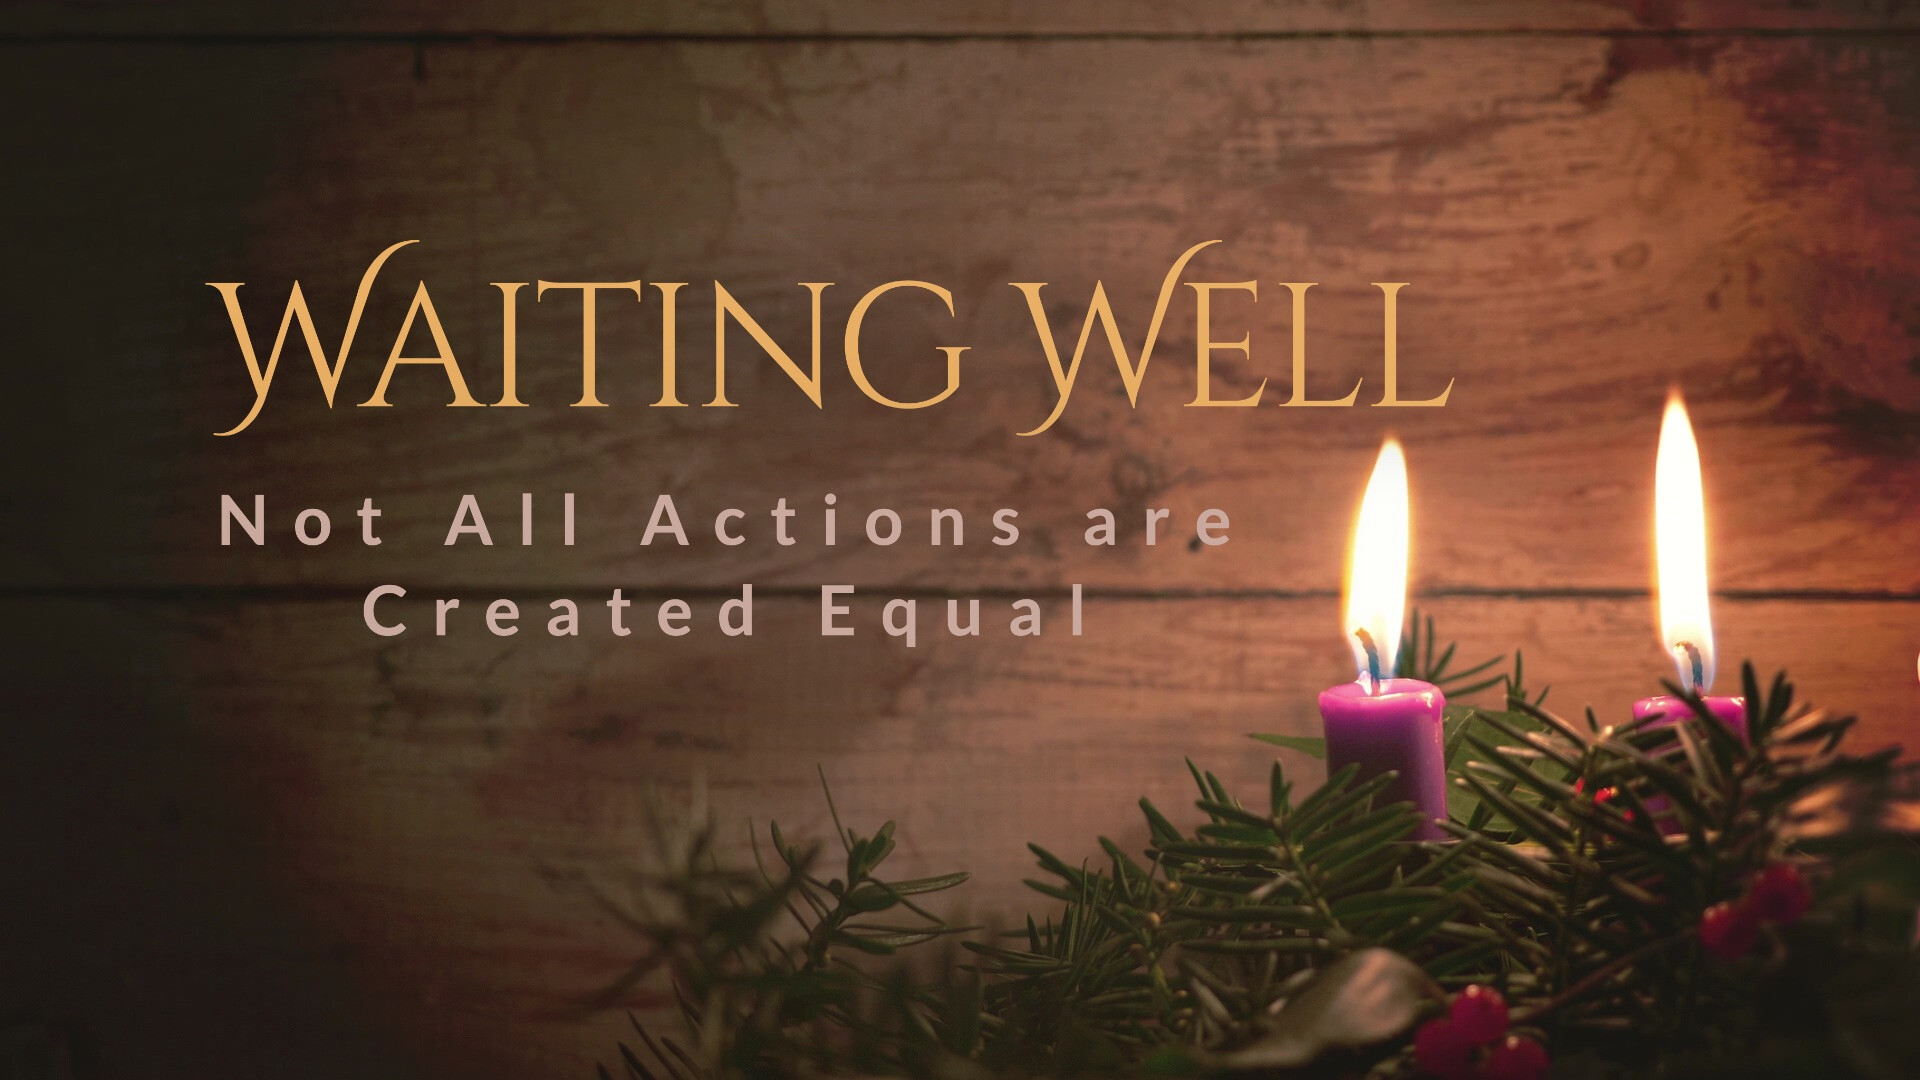 Waiting Well: Not All Actions are Created Equal